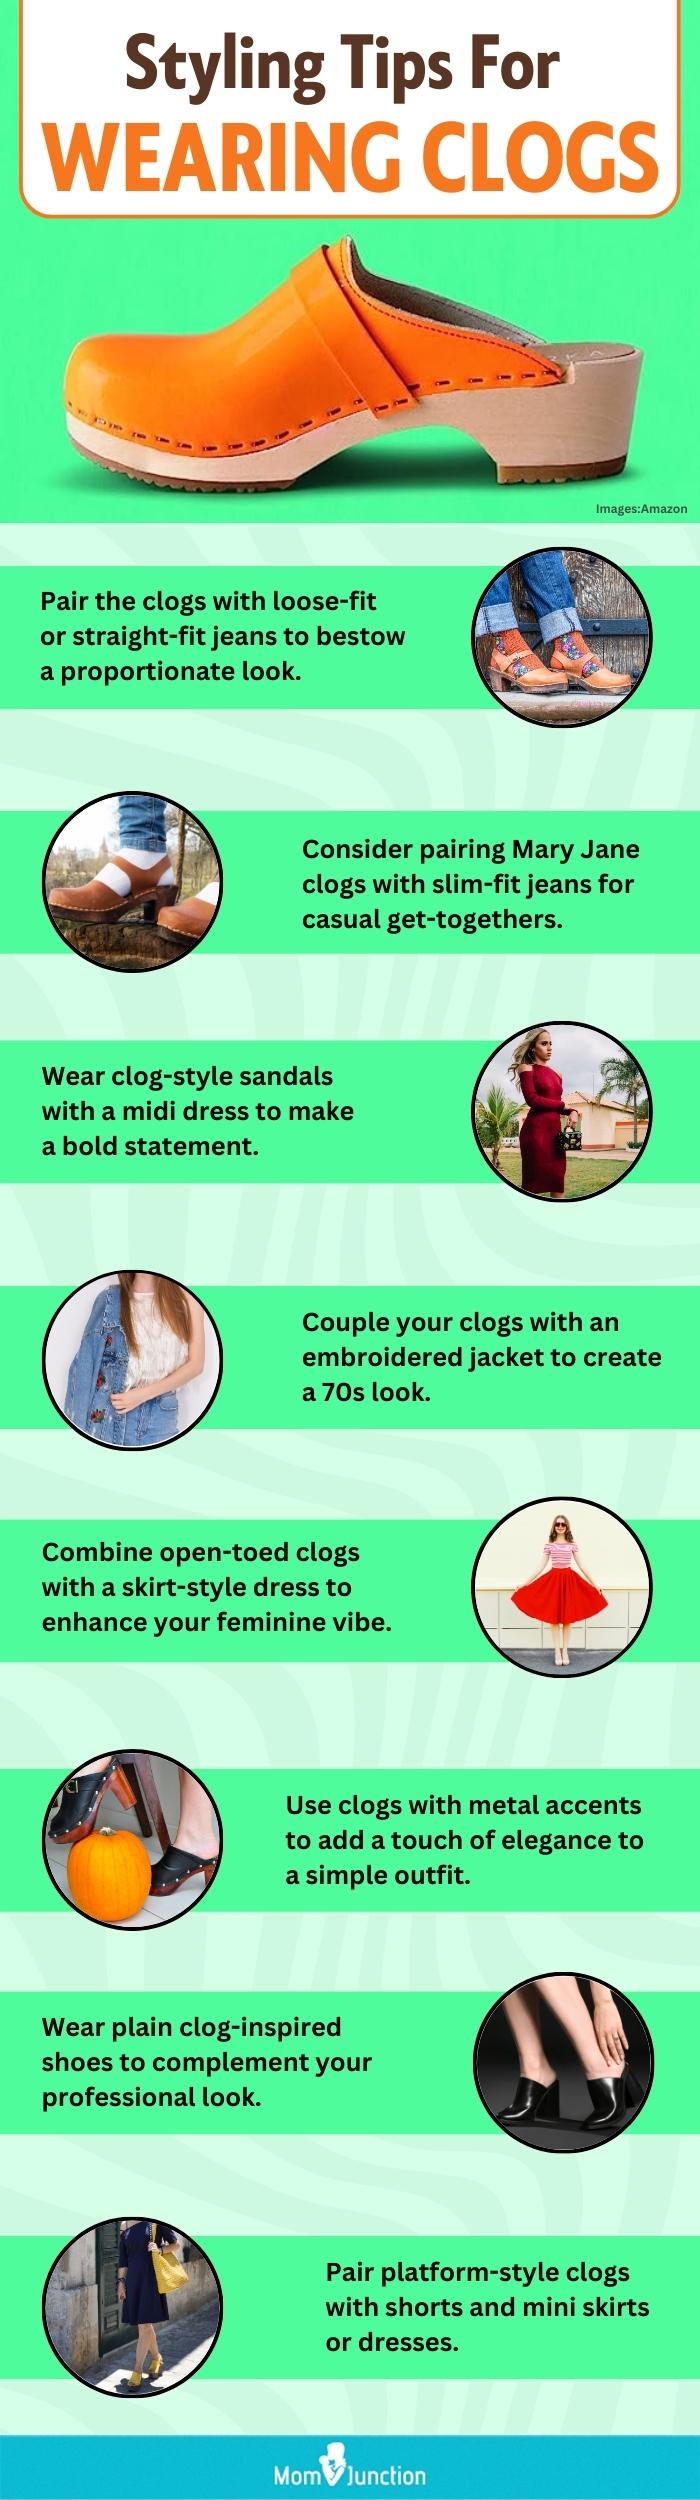 Styling Tips For Wearing Clogs(infographic)